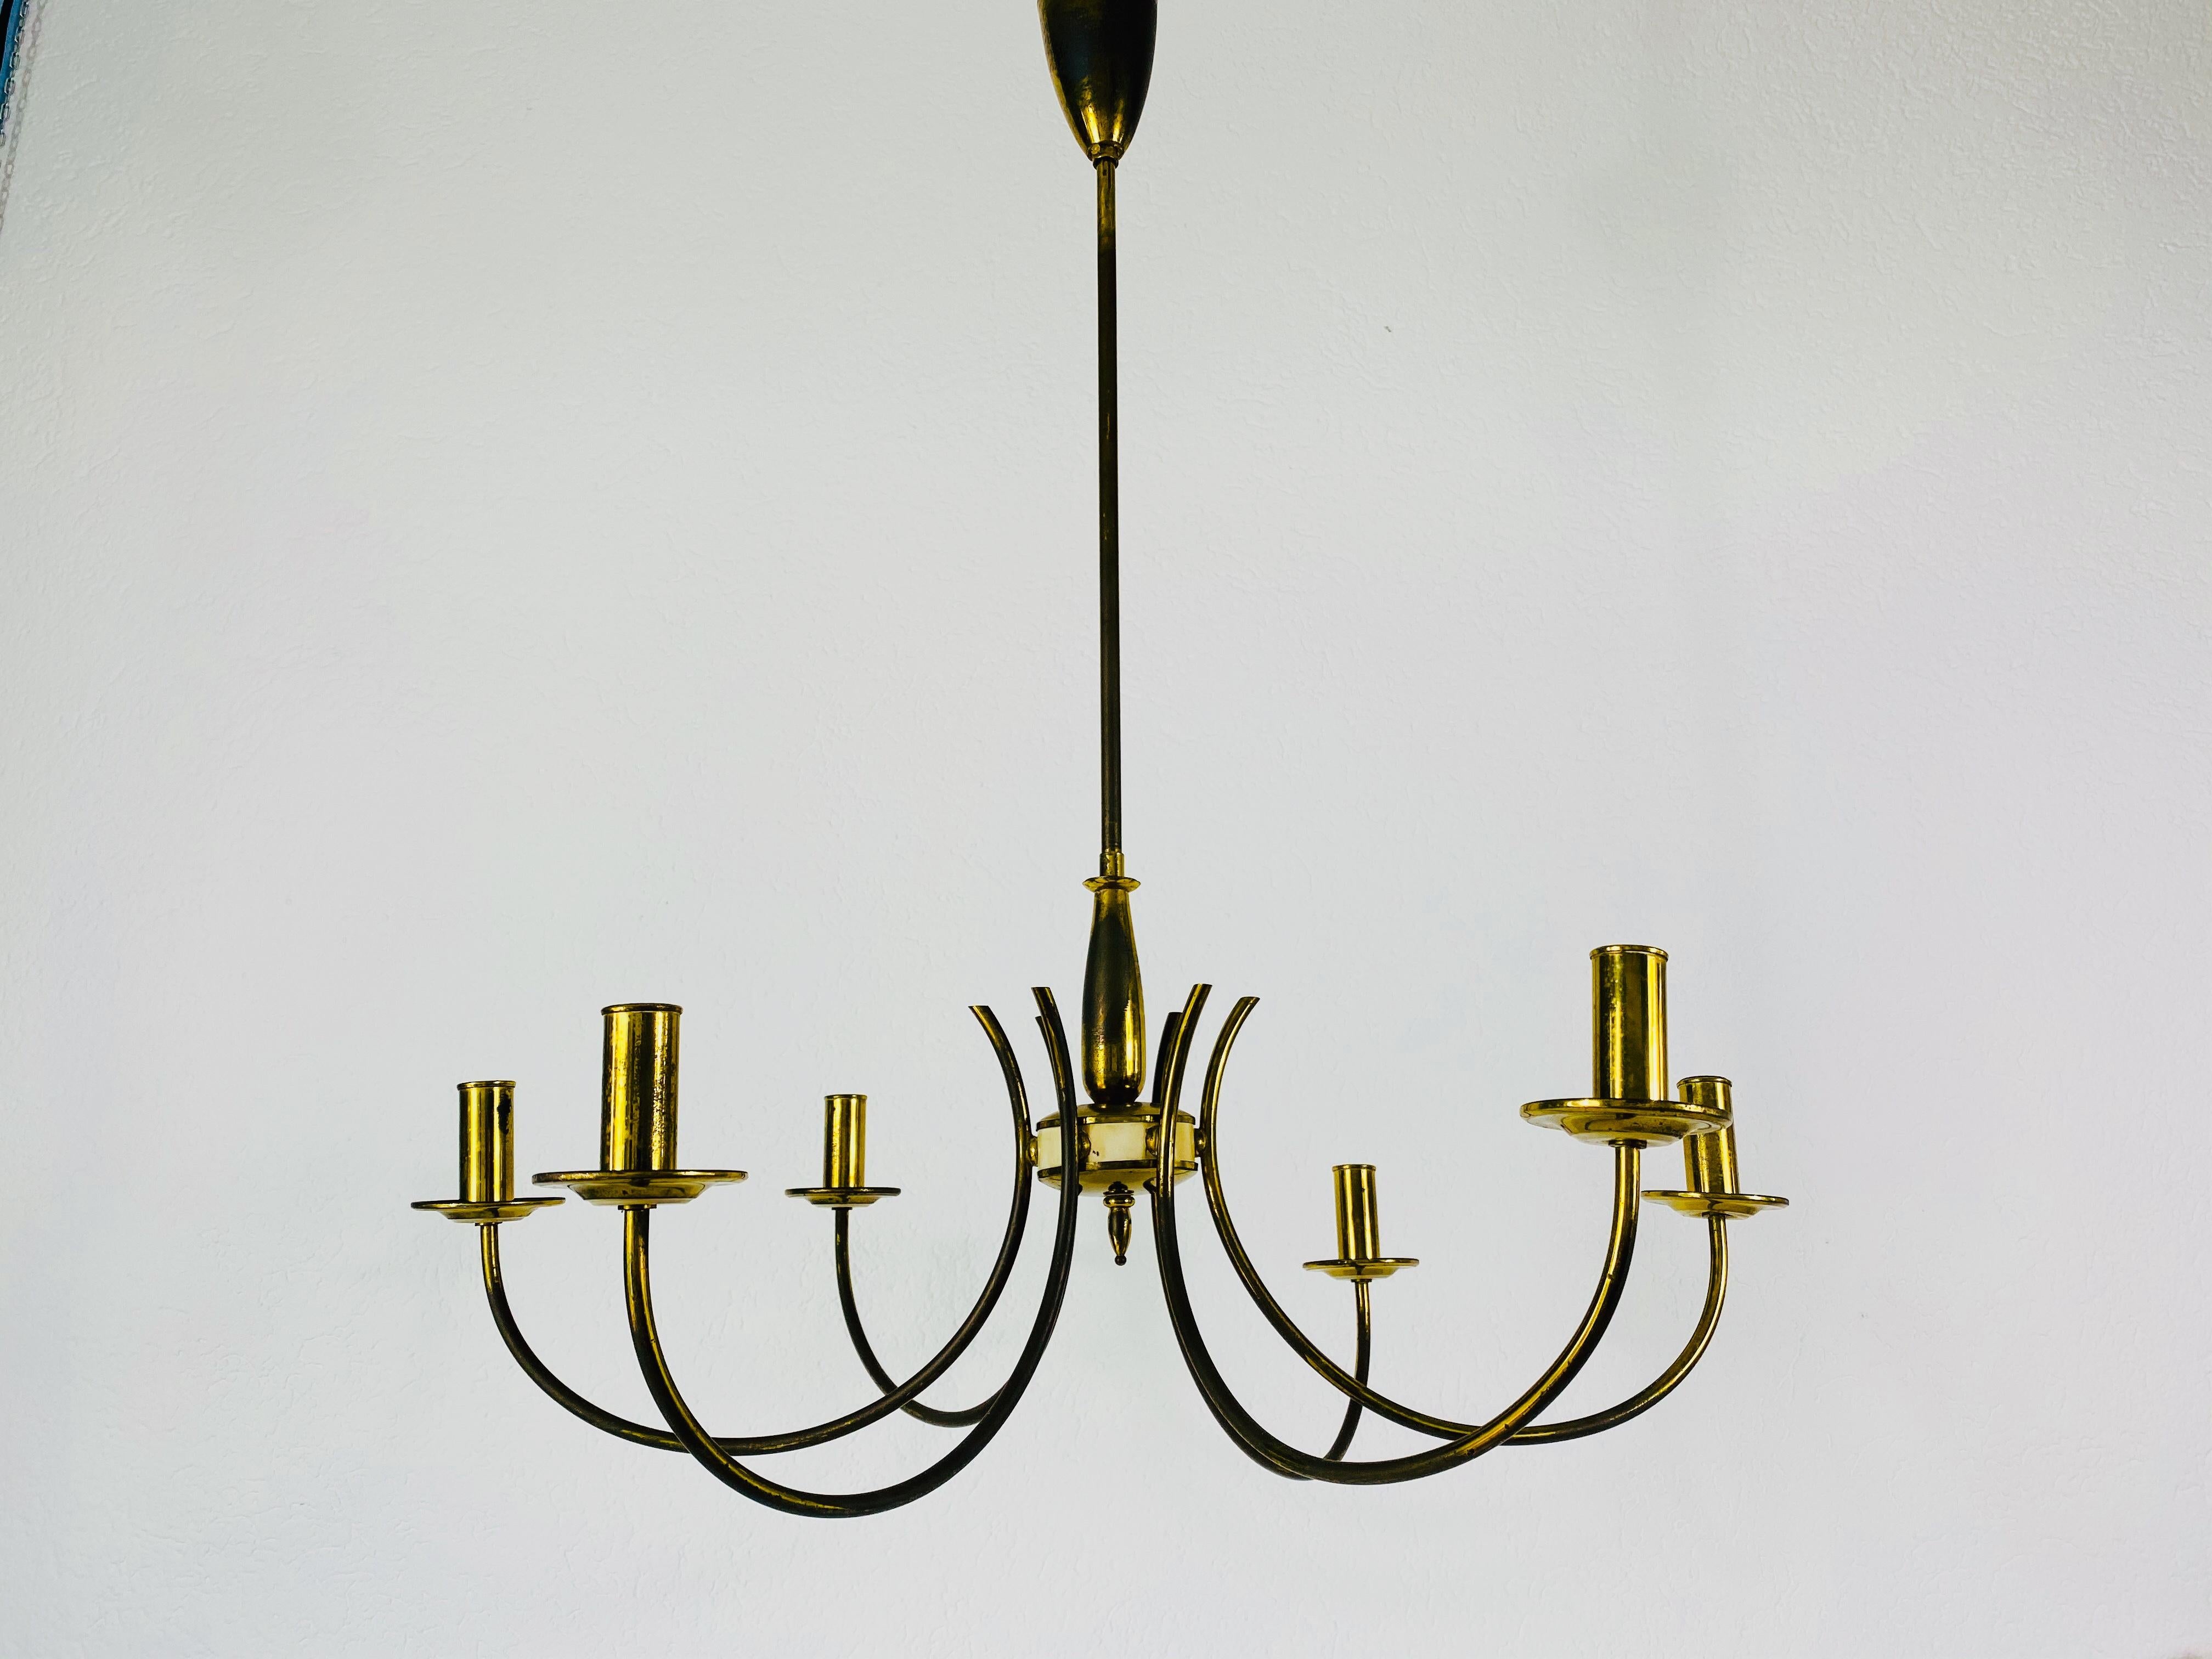 A midcentury chandelier made in Germany in the 1960s. It is fascinating with its rare arms and elegant design.

The light requires six E14 light bulbs.